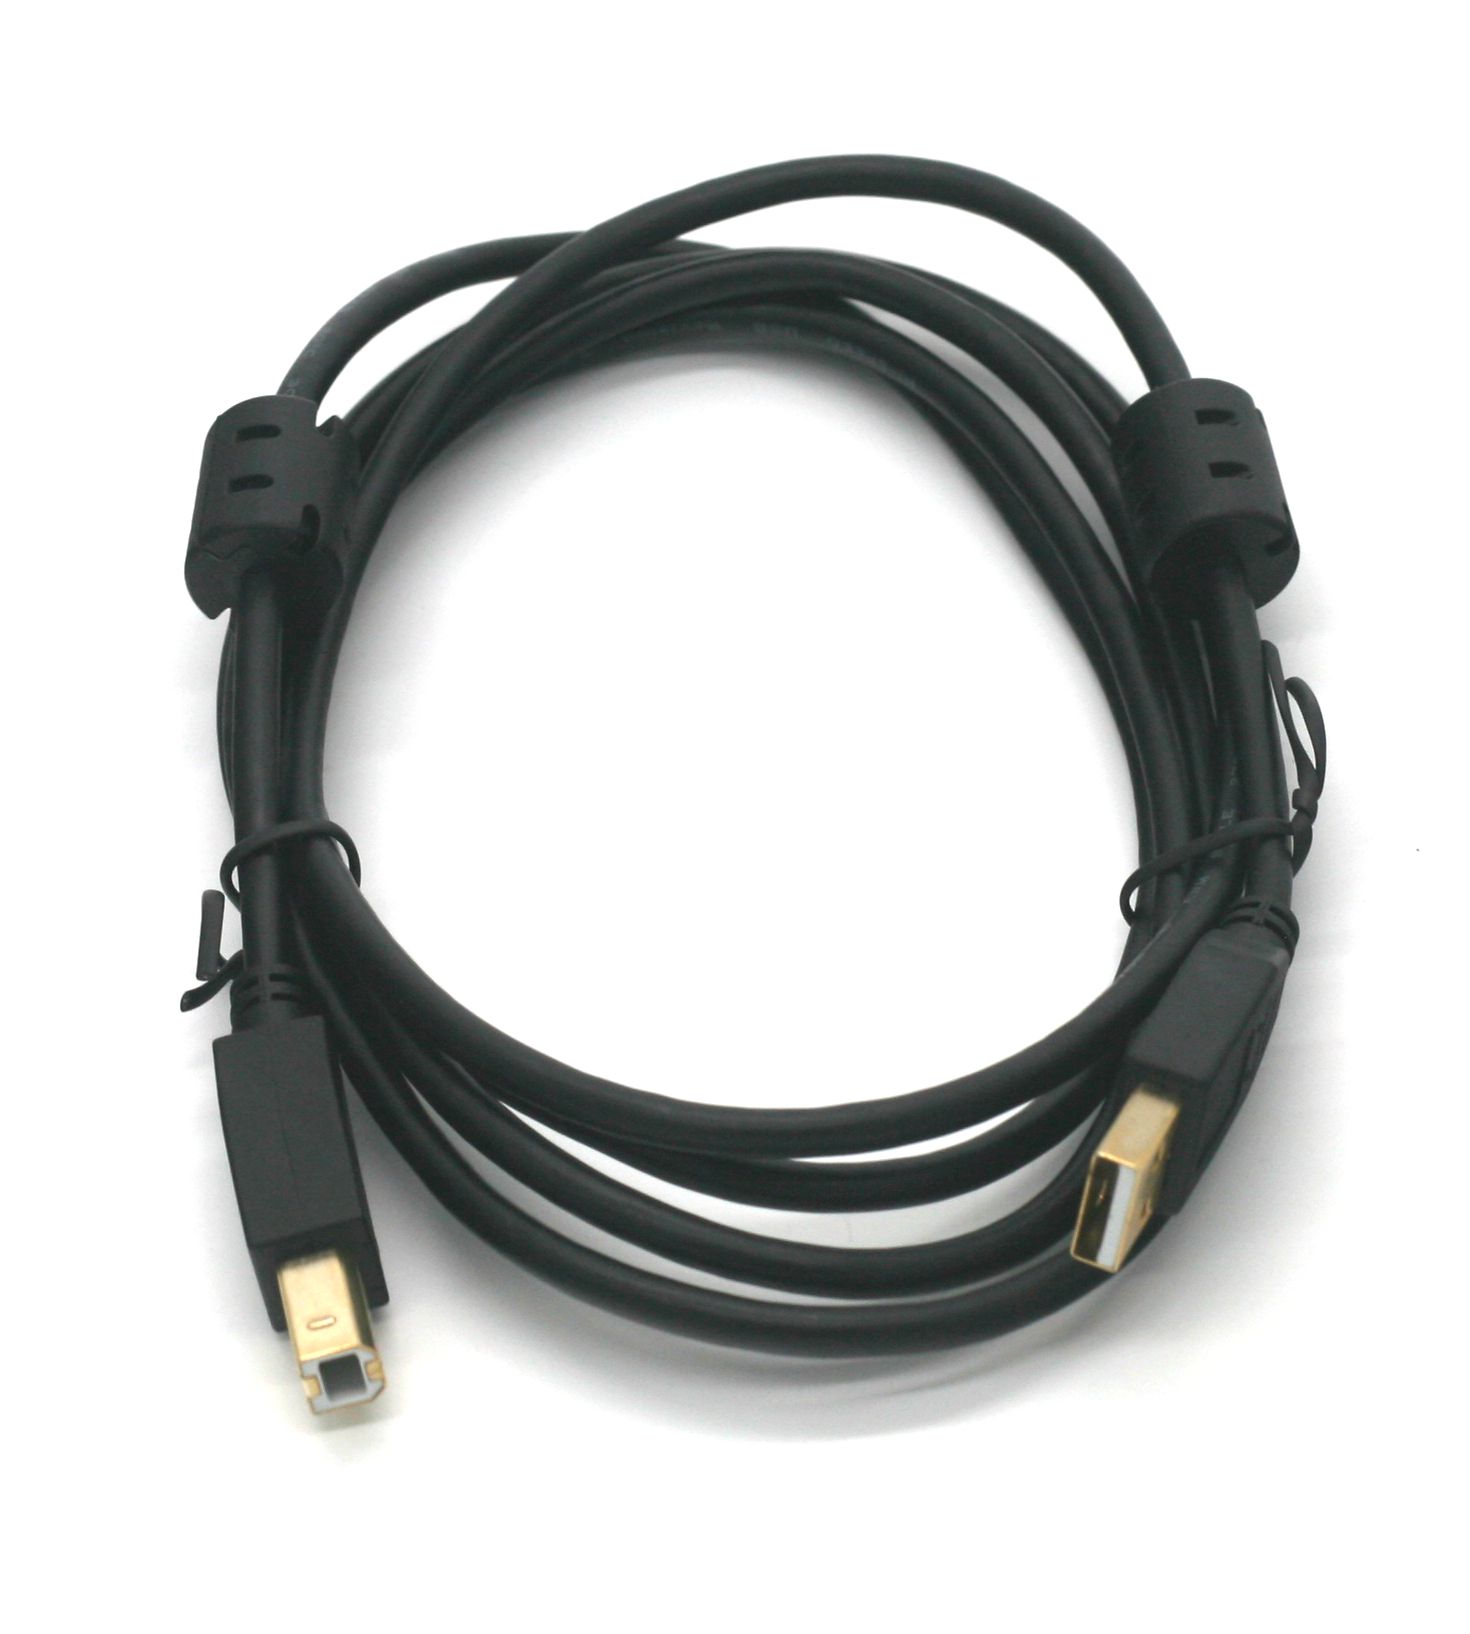 6ft Black USB 2.0 Printer Cable, Type A to B